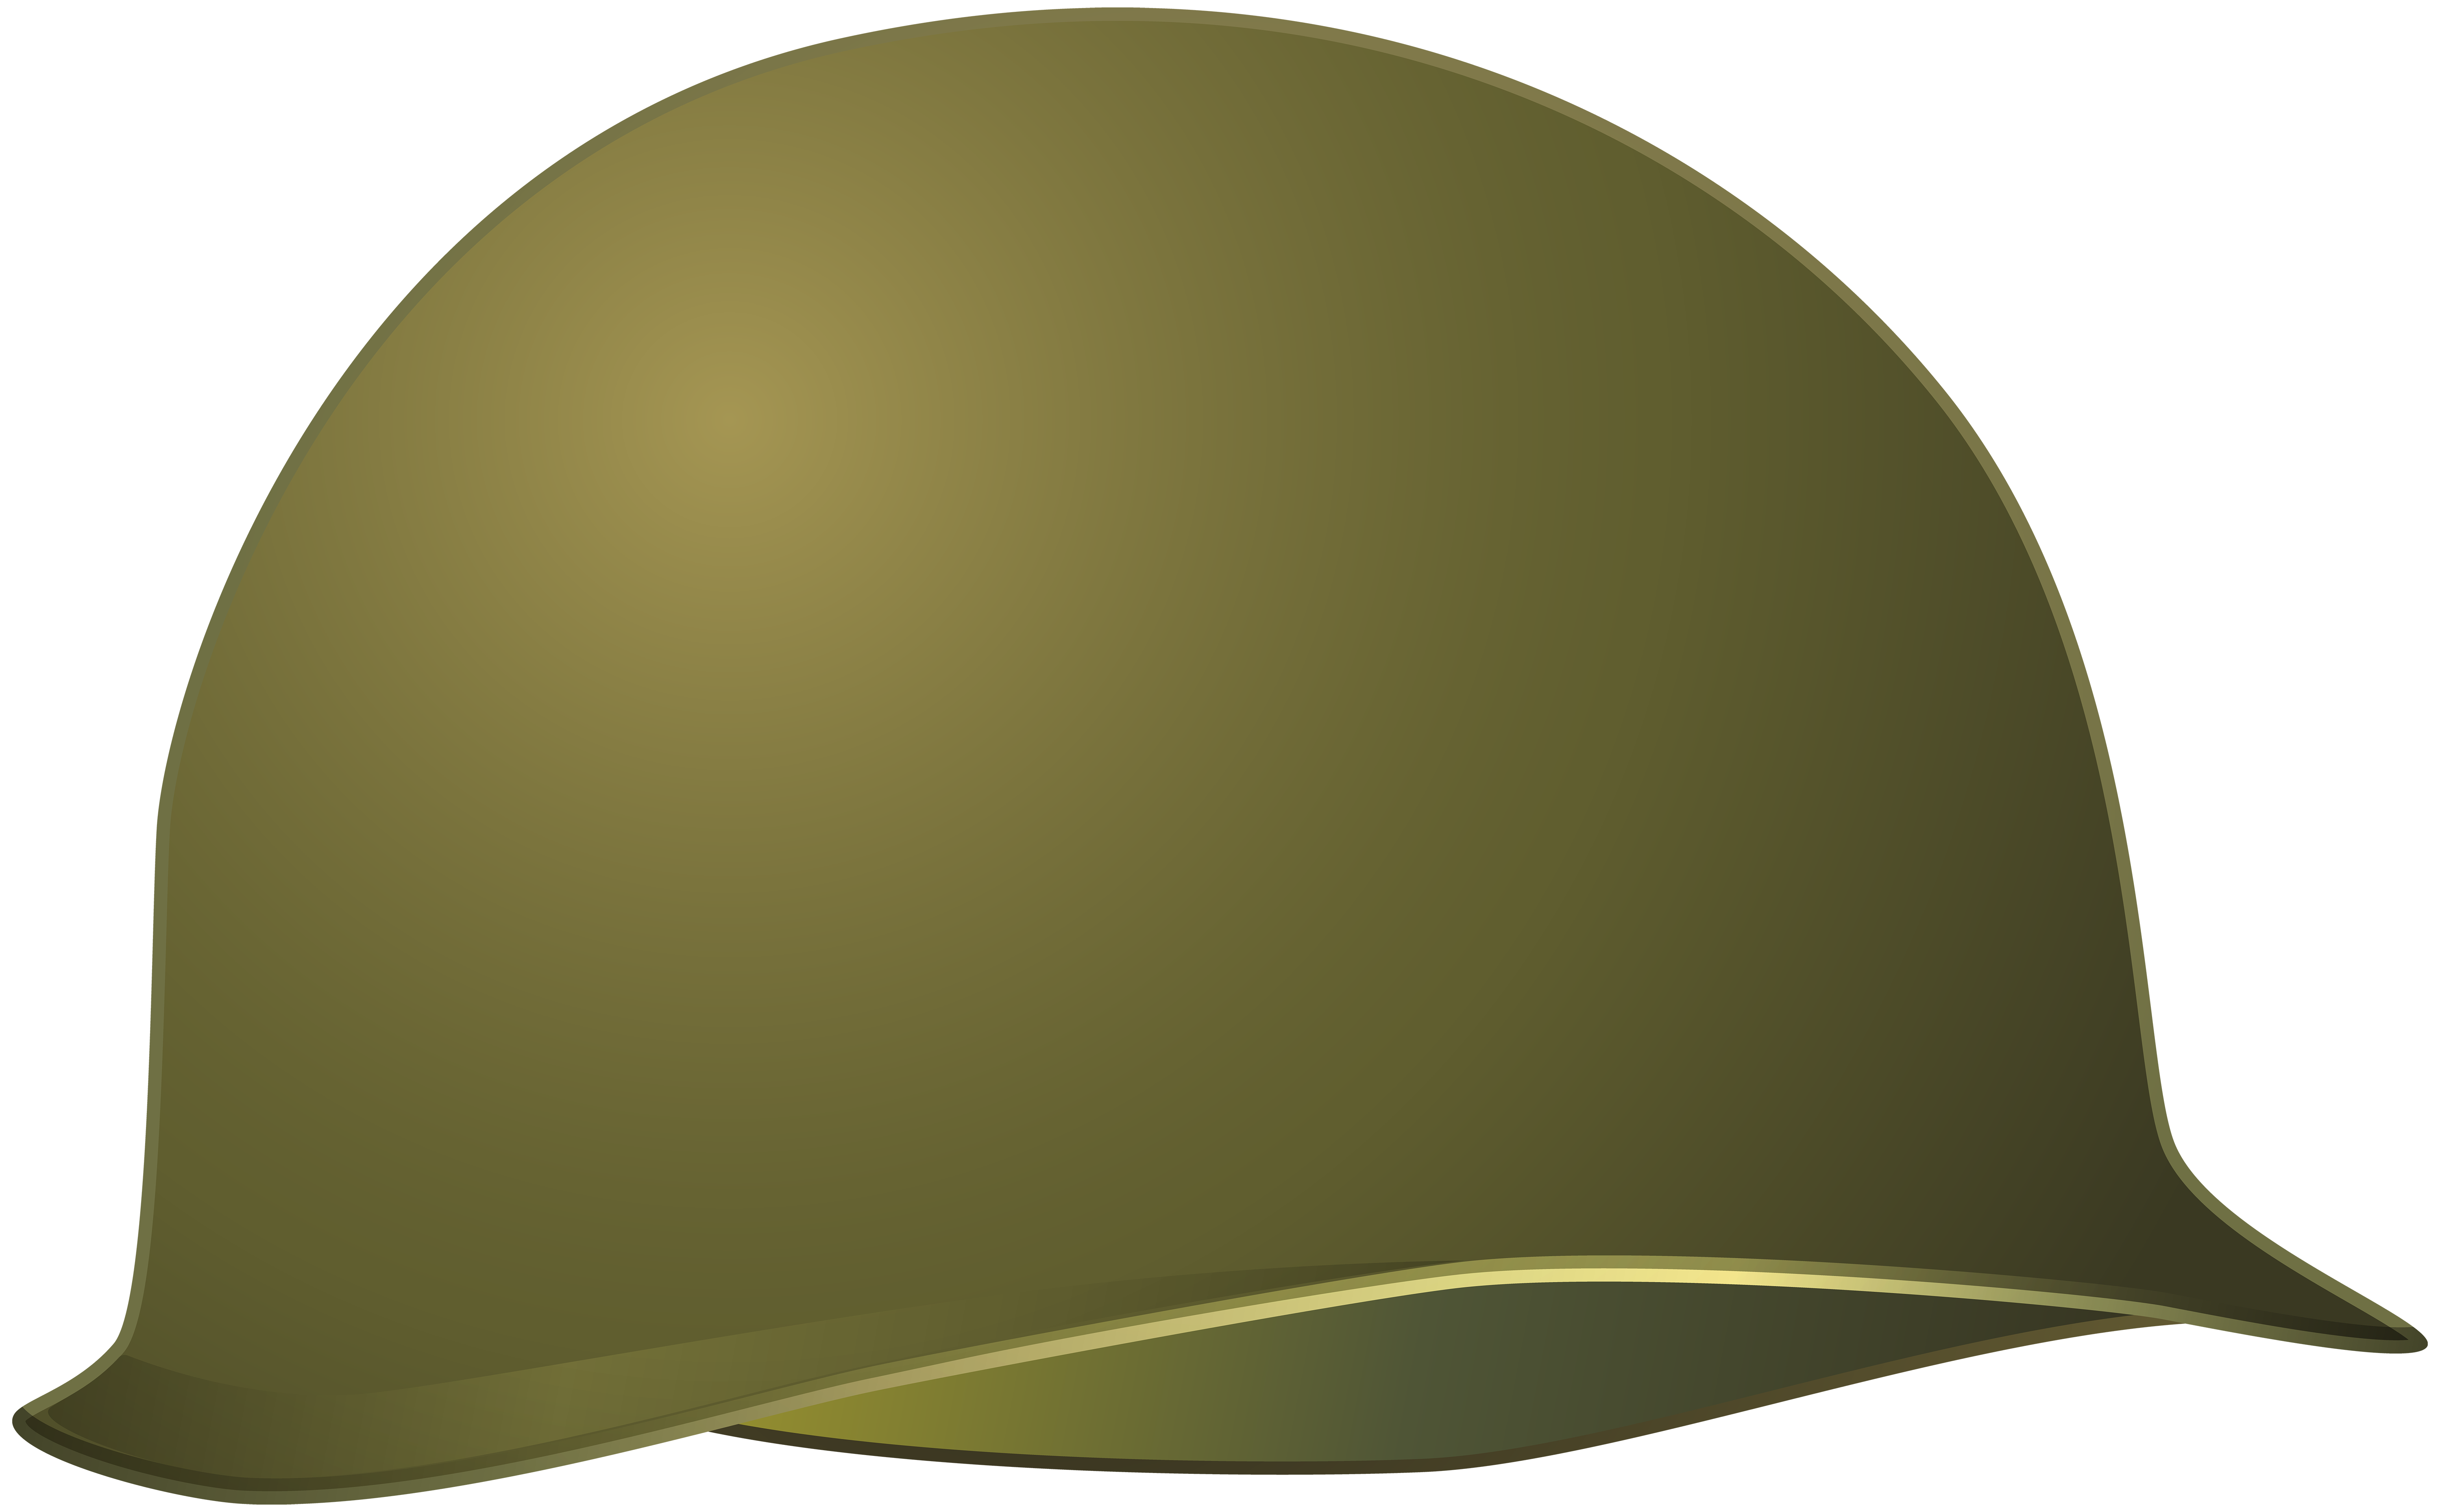 Military Helmet PNG Clip Art Image | Gallery Yopriceville - High